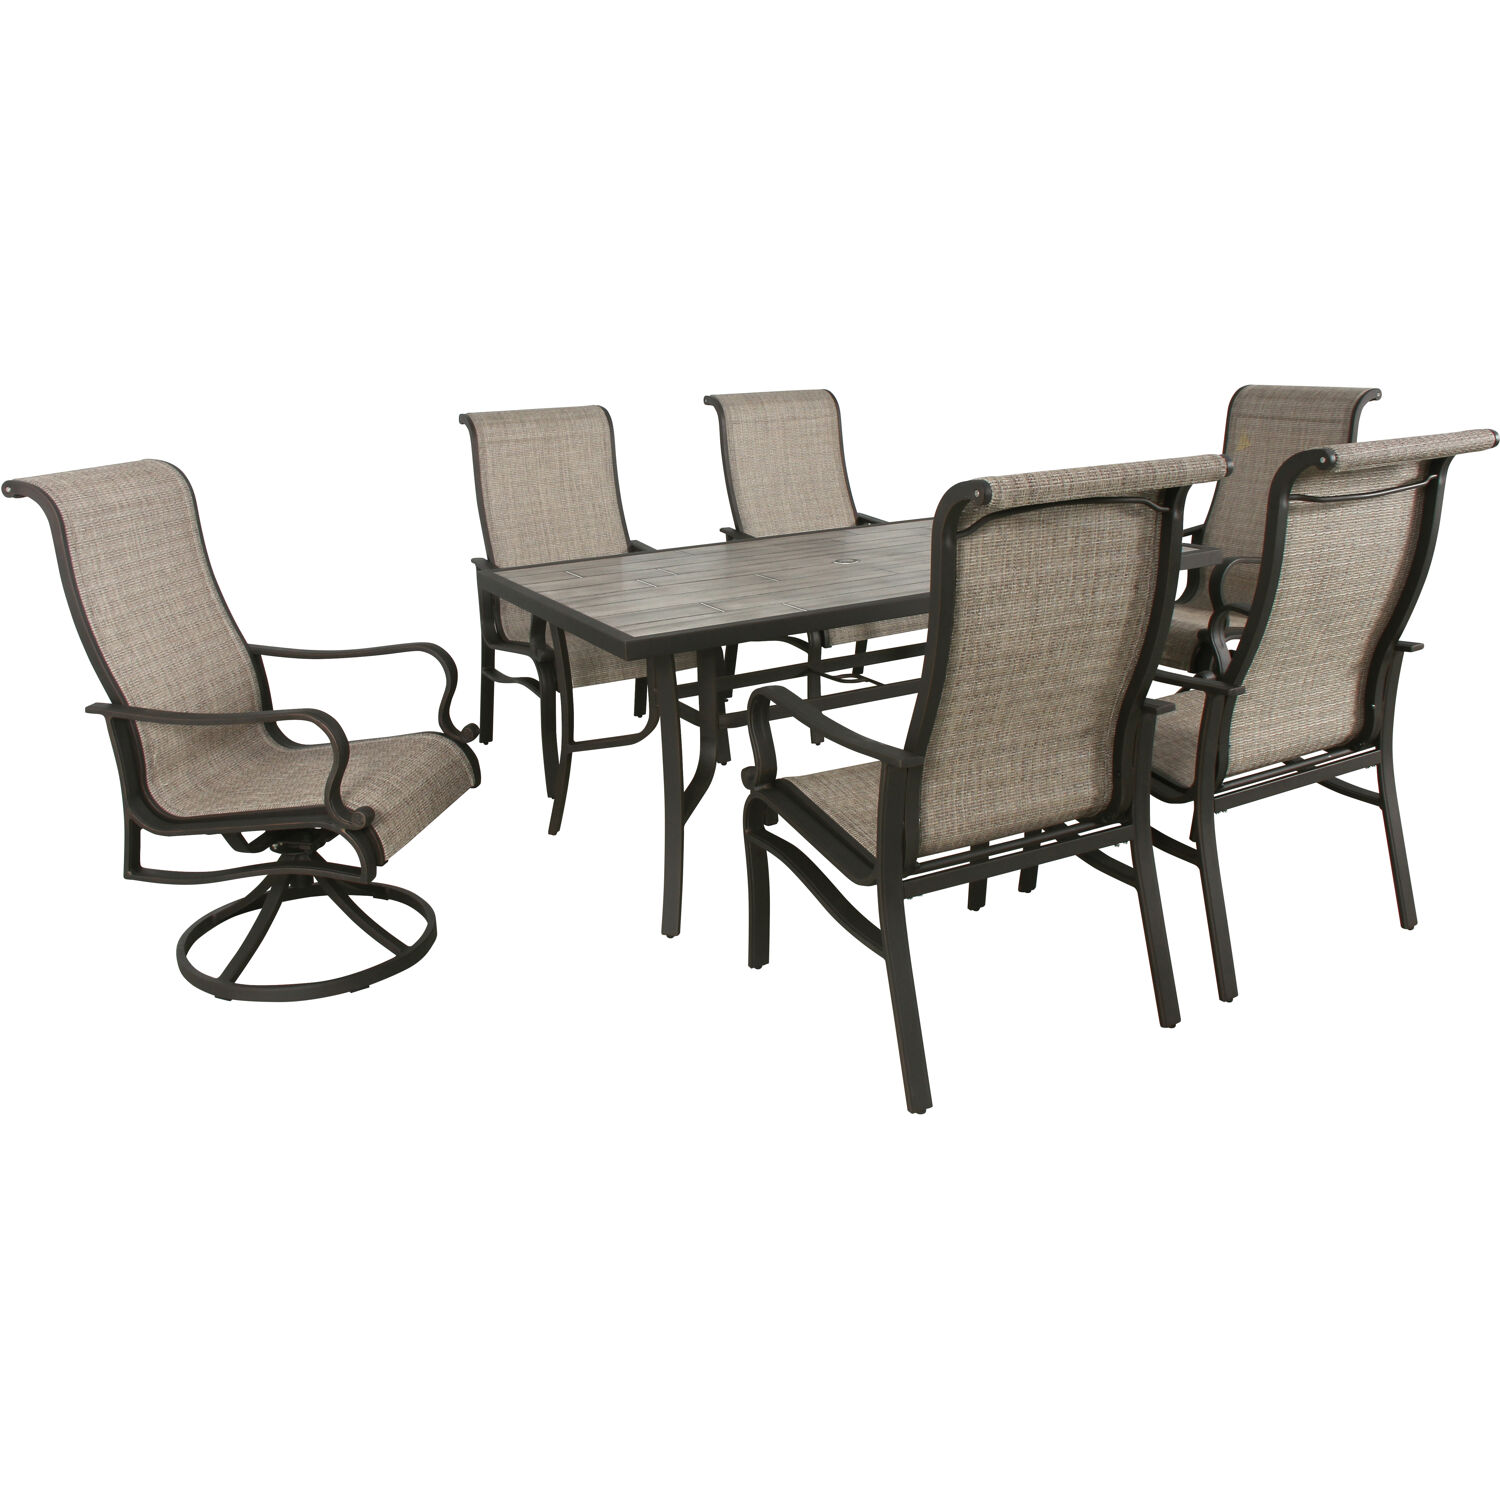 Hanover Venice 7-Piece Dining Set with 2 Sling Swivel Rocker Chairs, 4 Sling Stationary Chairs and 66 in. x 40 in. Slat Top Table - image 1 of 12